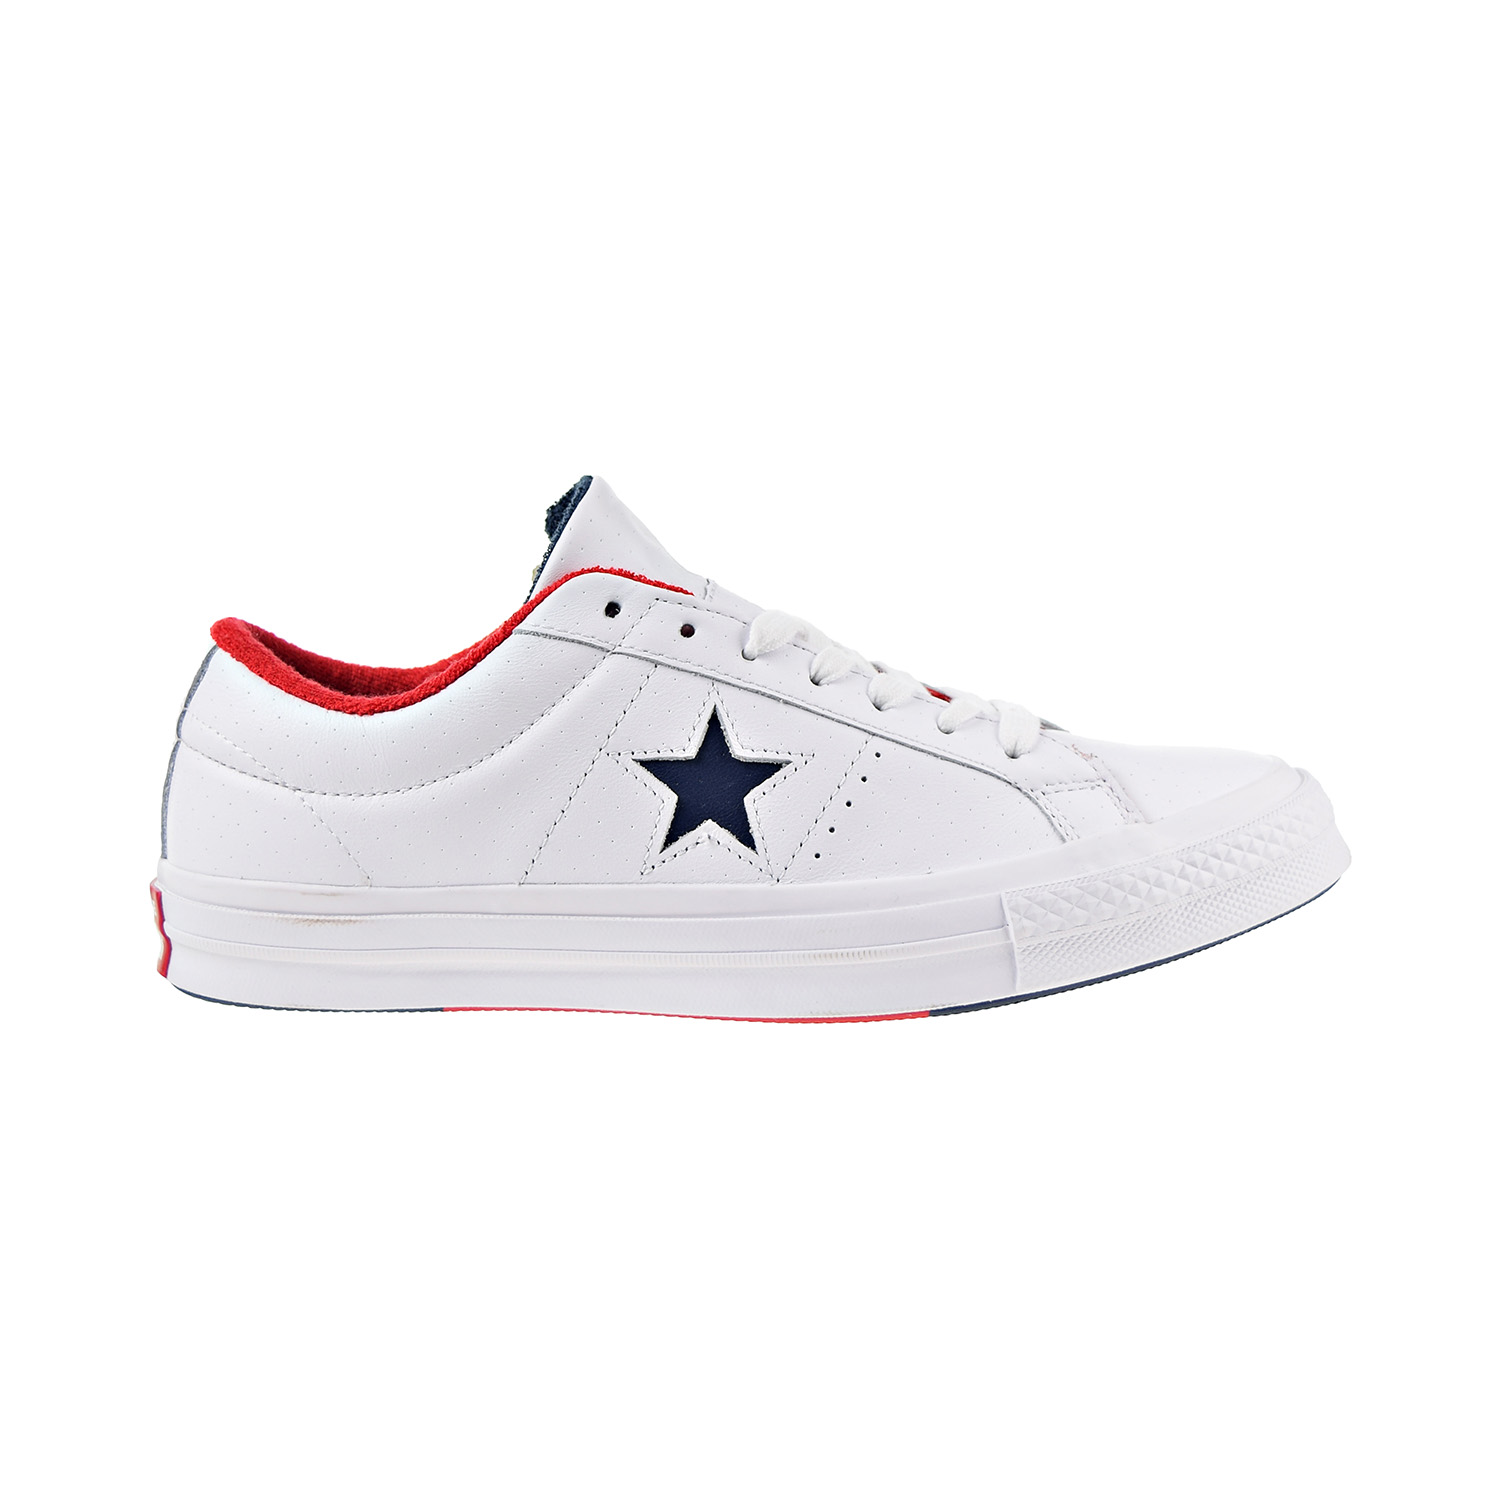 converse one star mens shoes